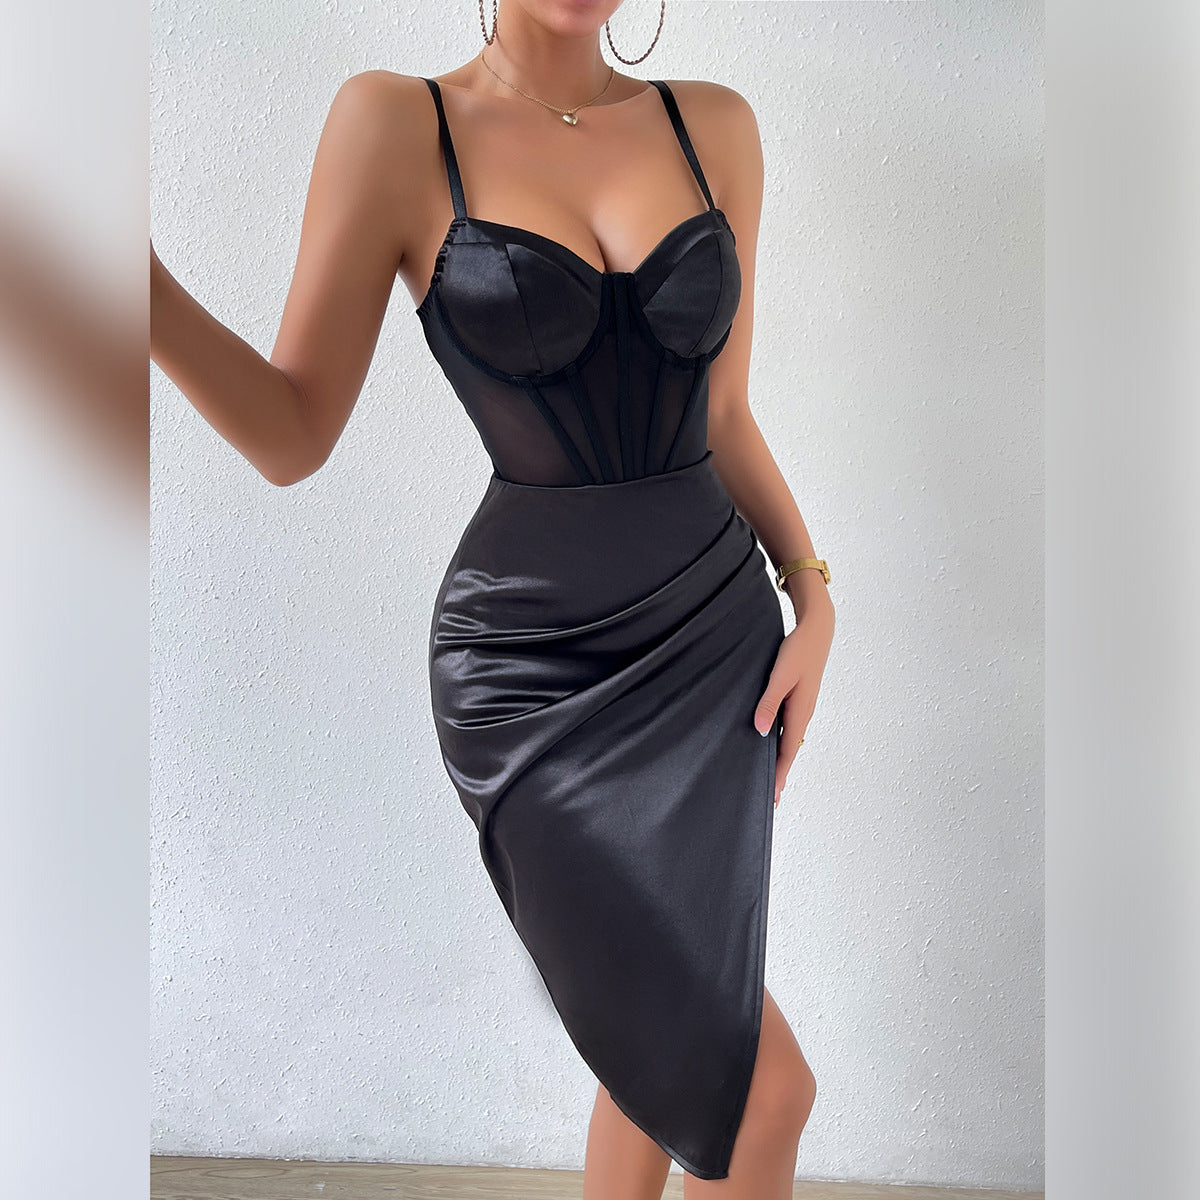 Sexy Classy Dress with Boning Corset (shipping and taxes included)